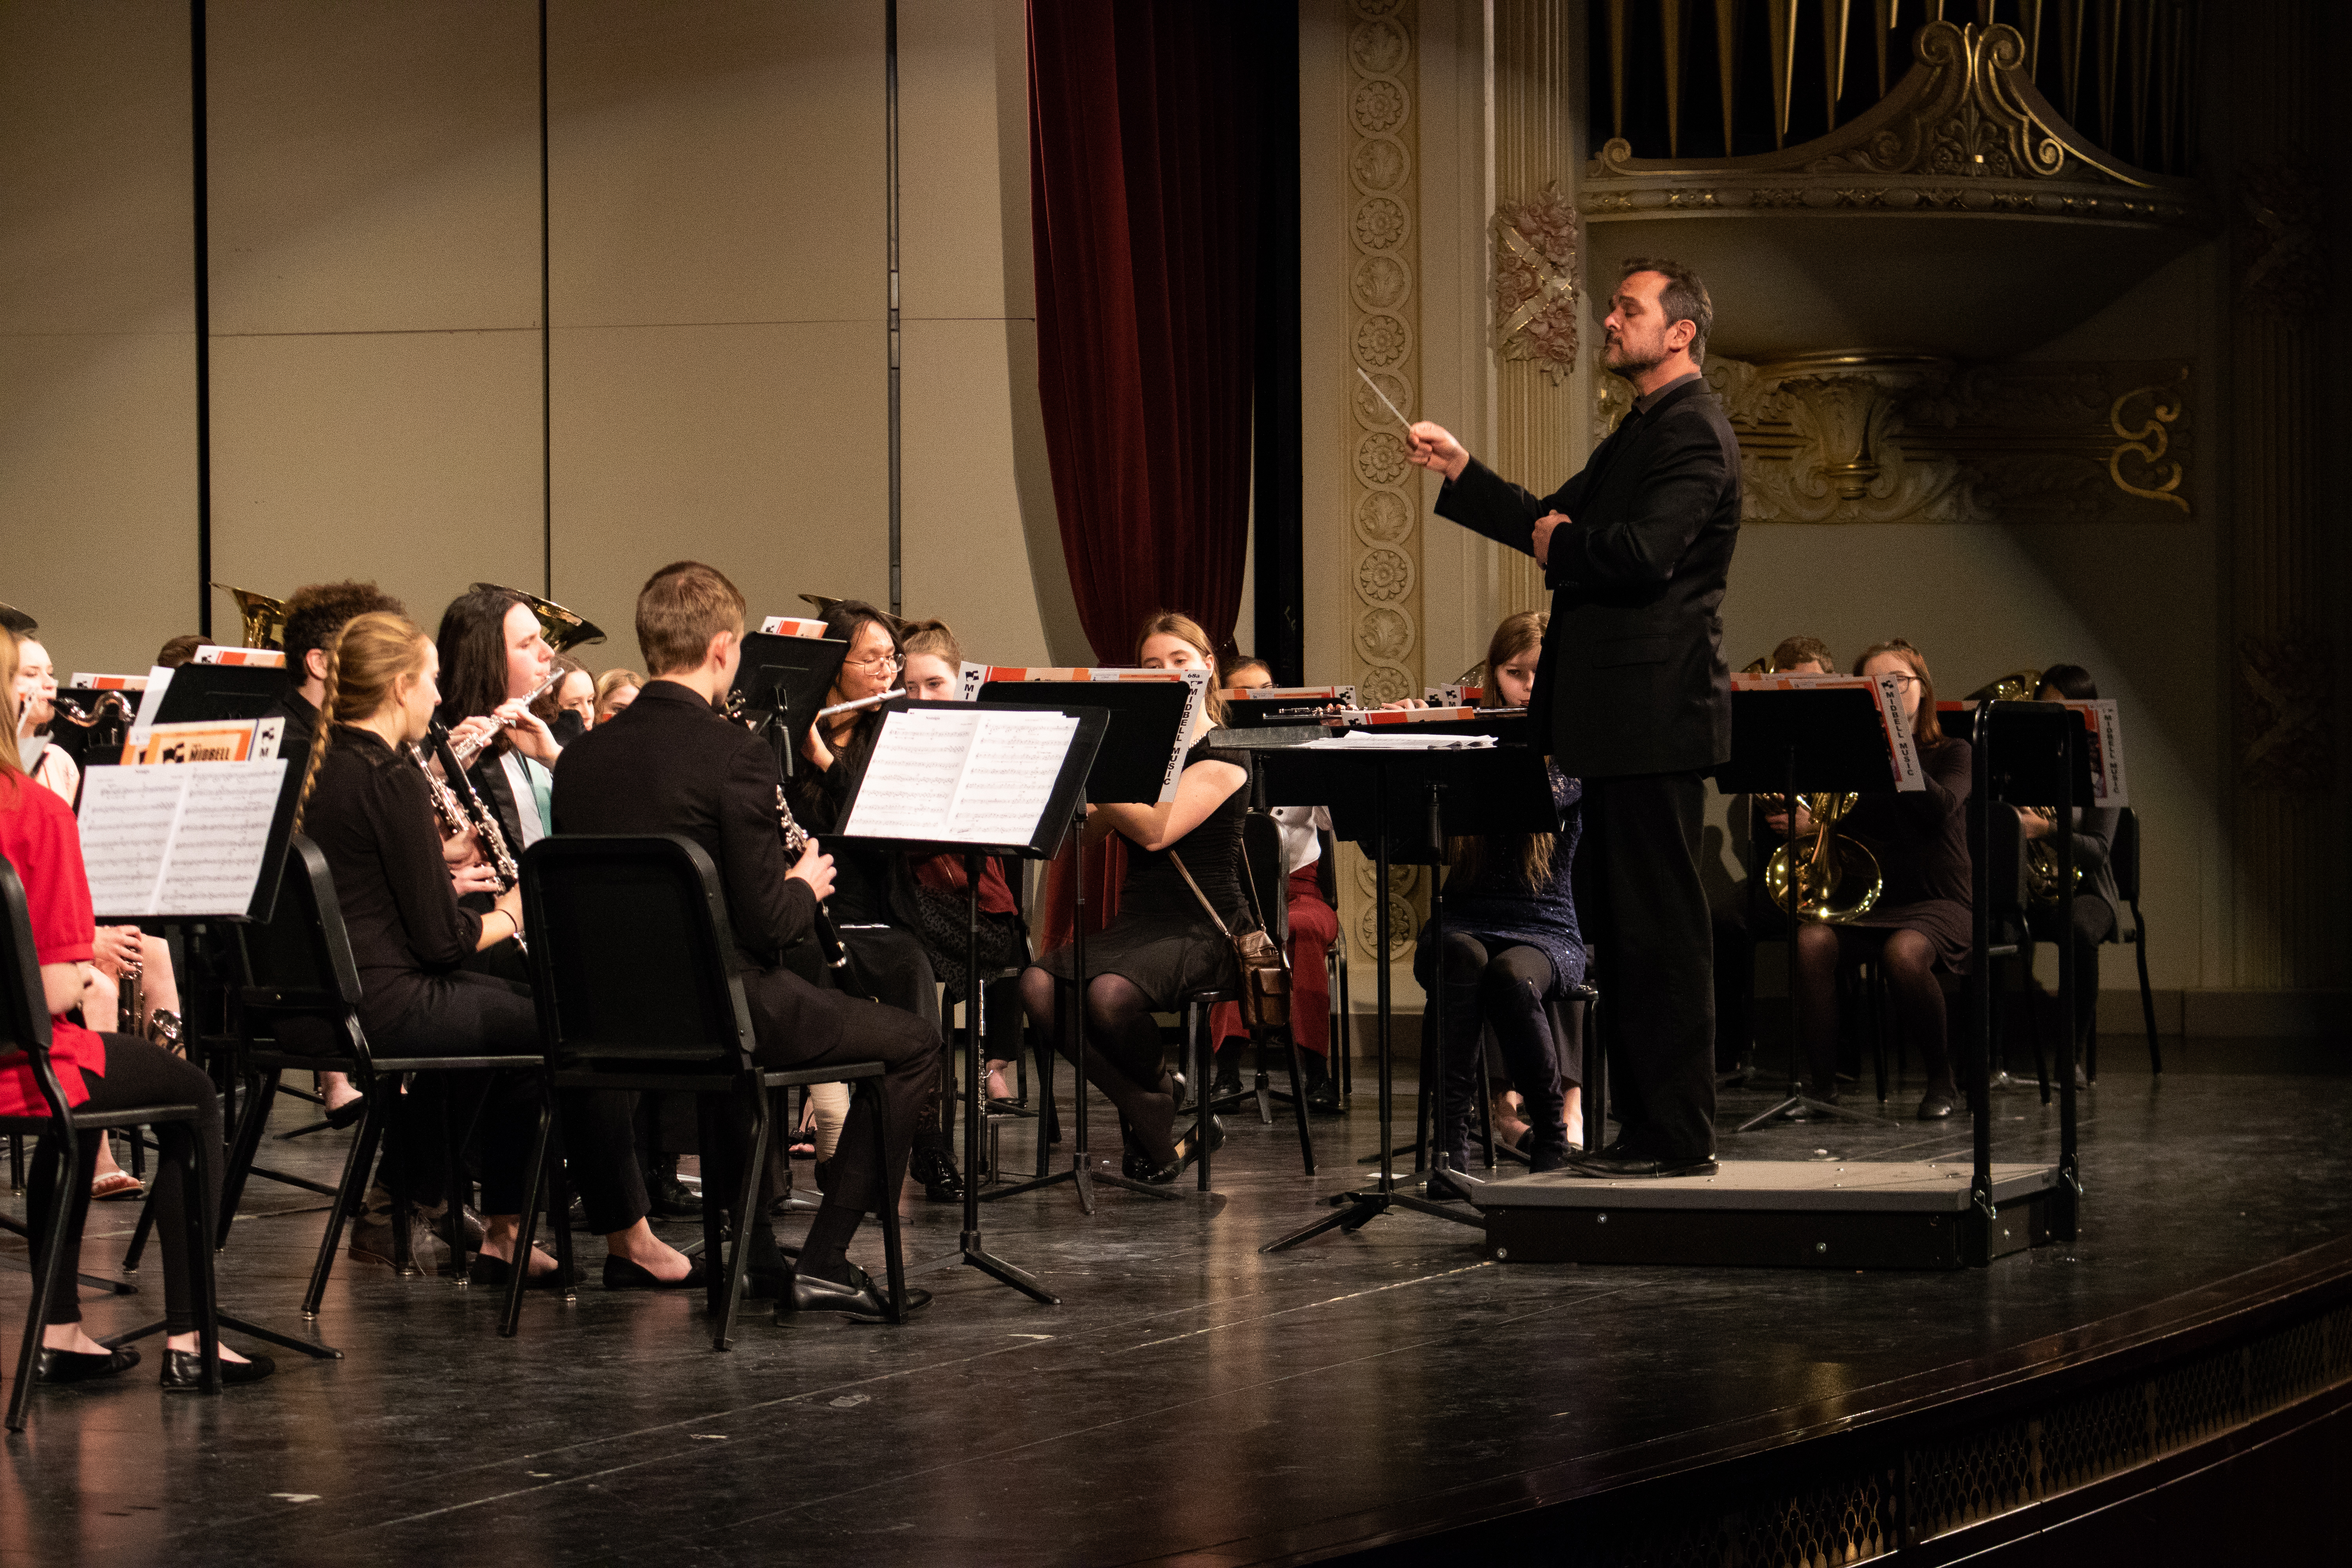 Annual band festival offers high school students new opportunities